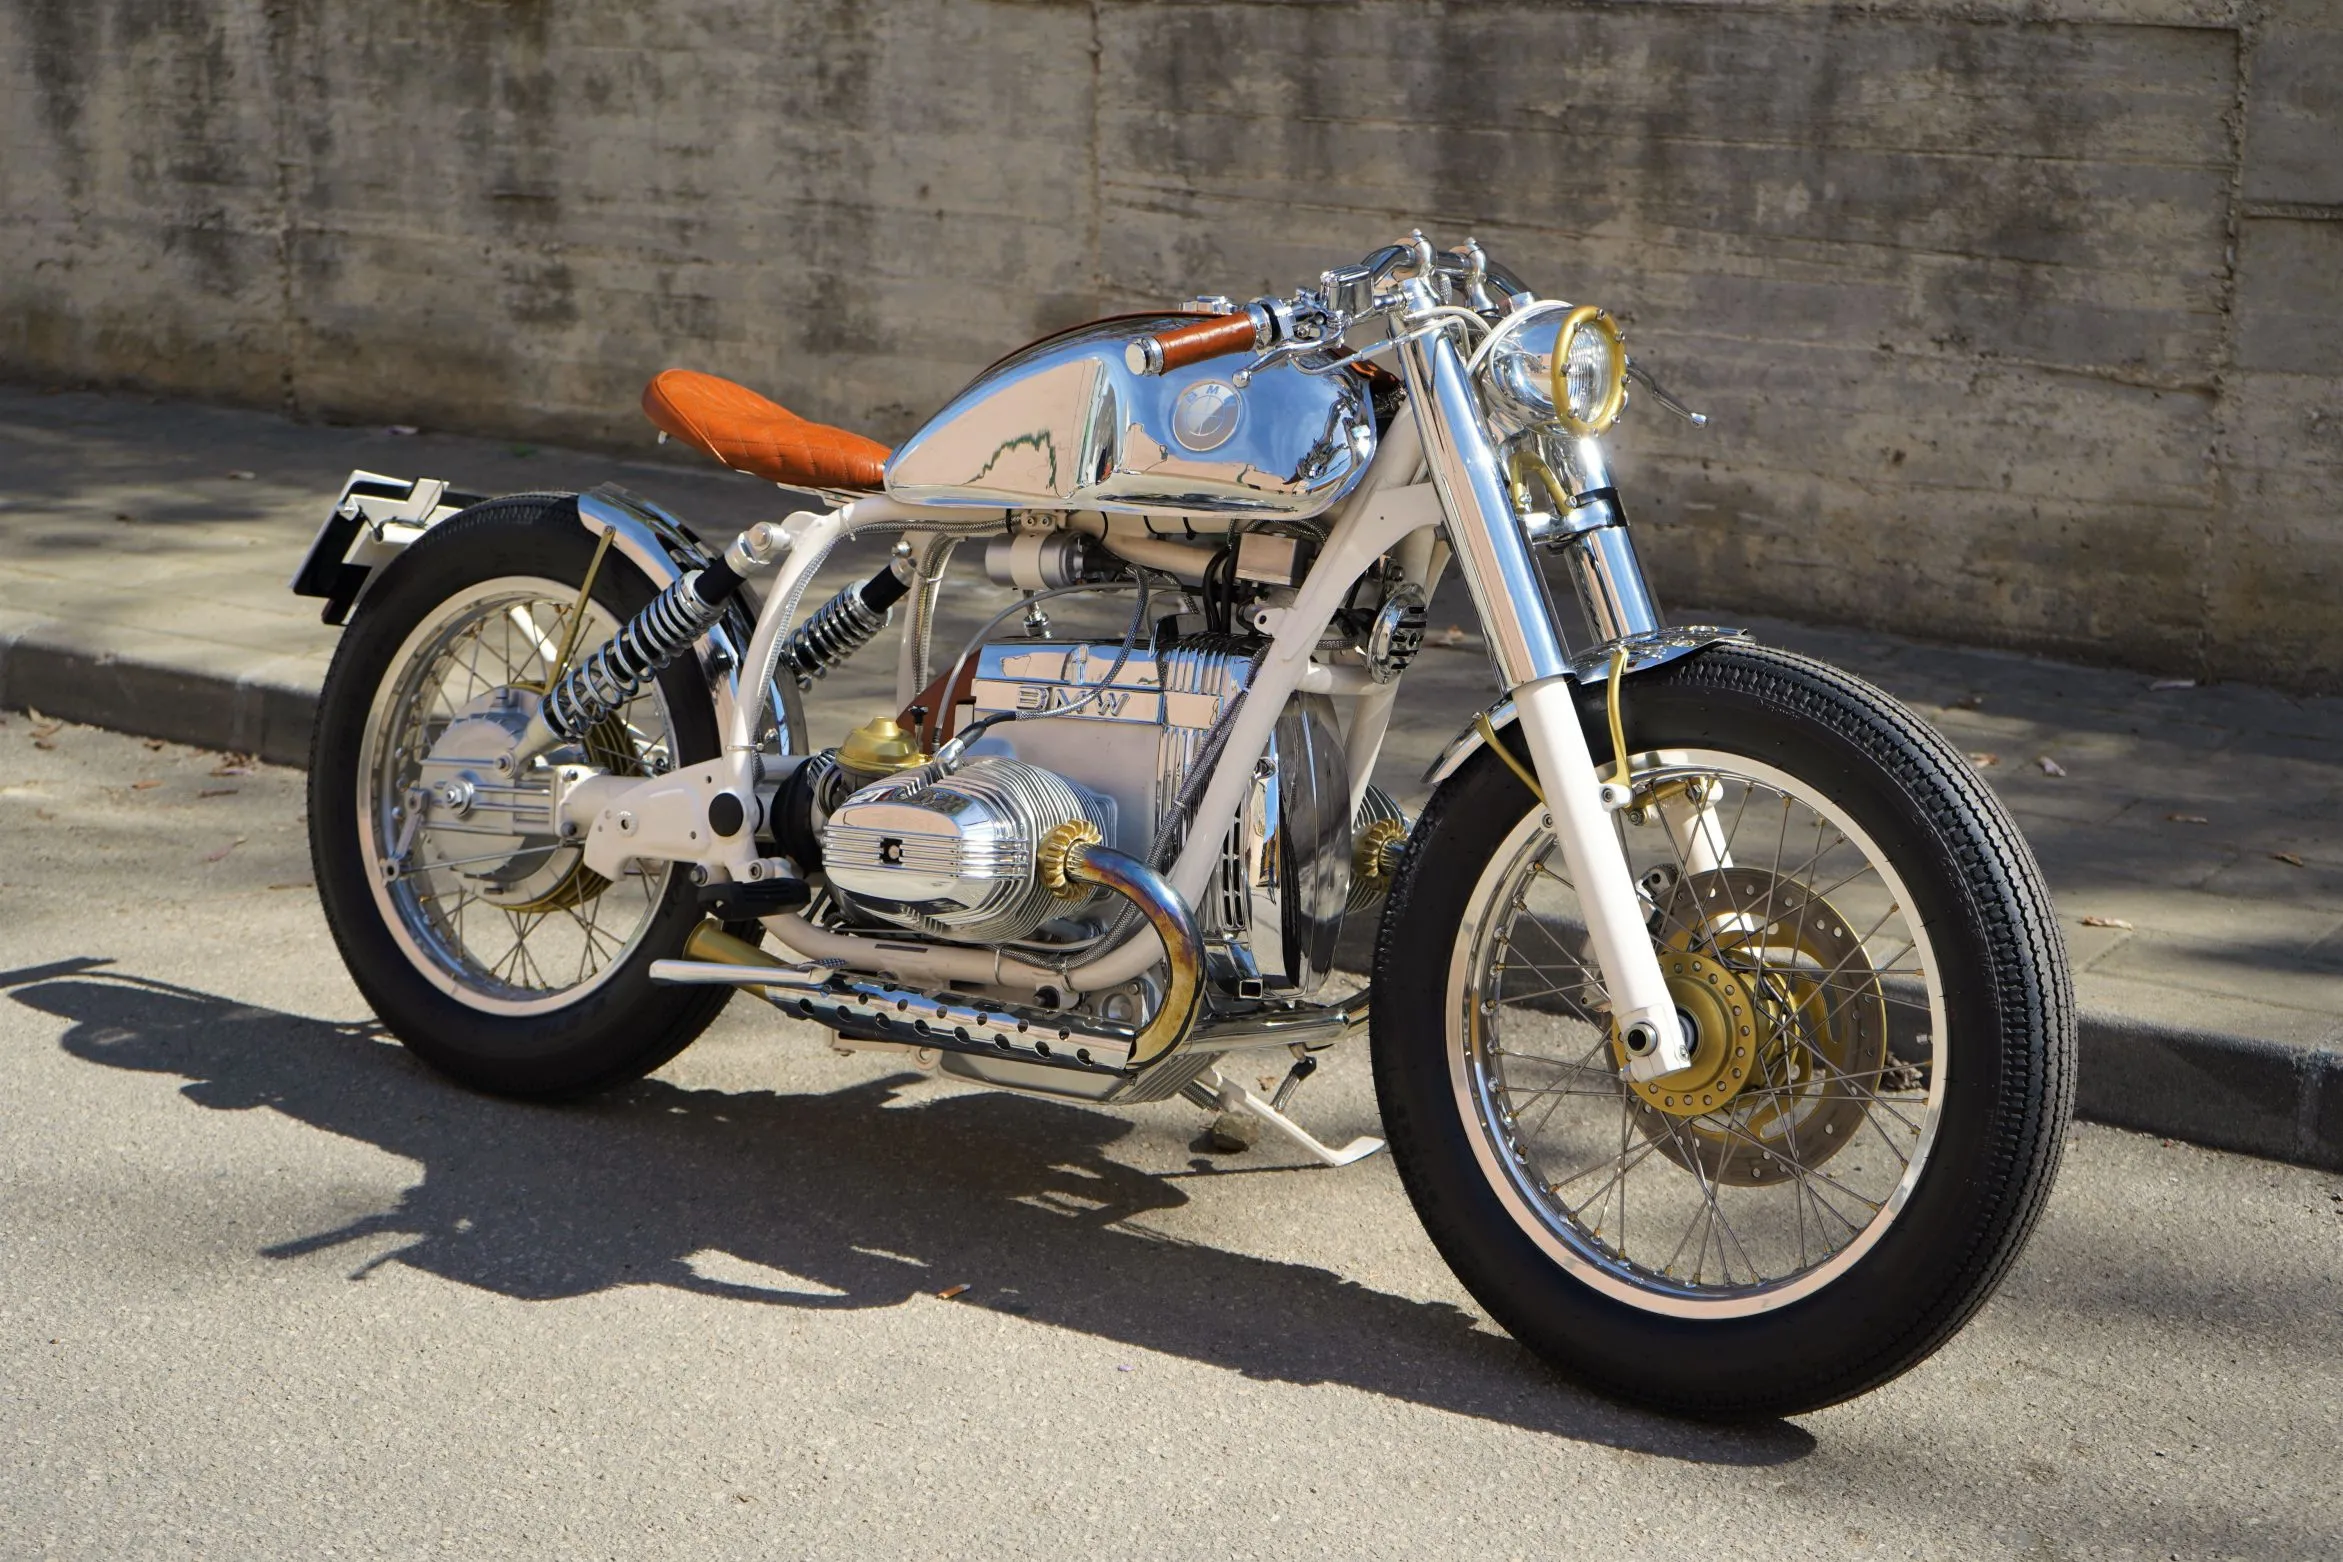 BMW R100 Cafe Racer Sport Edition by Lord Drake Kustoms